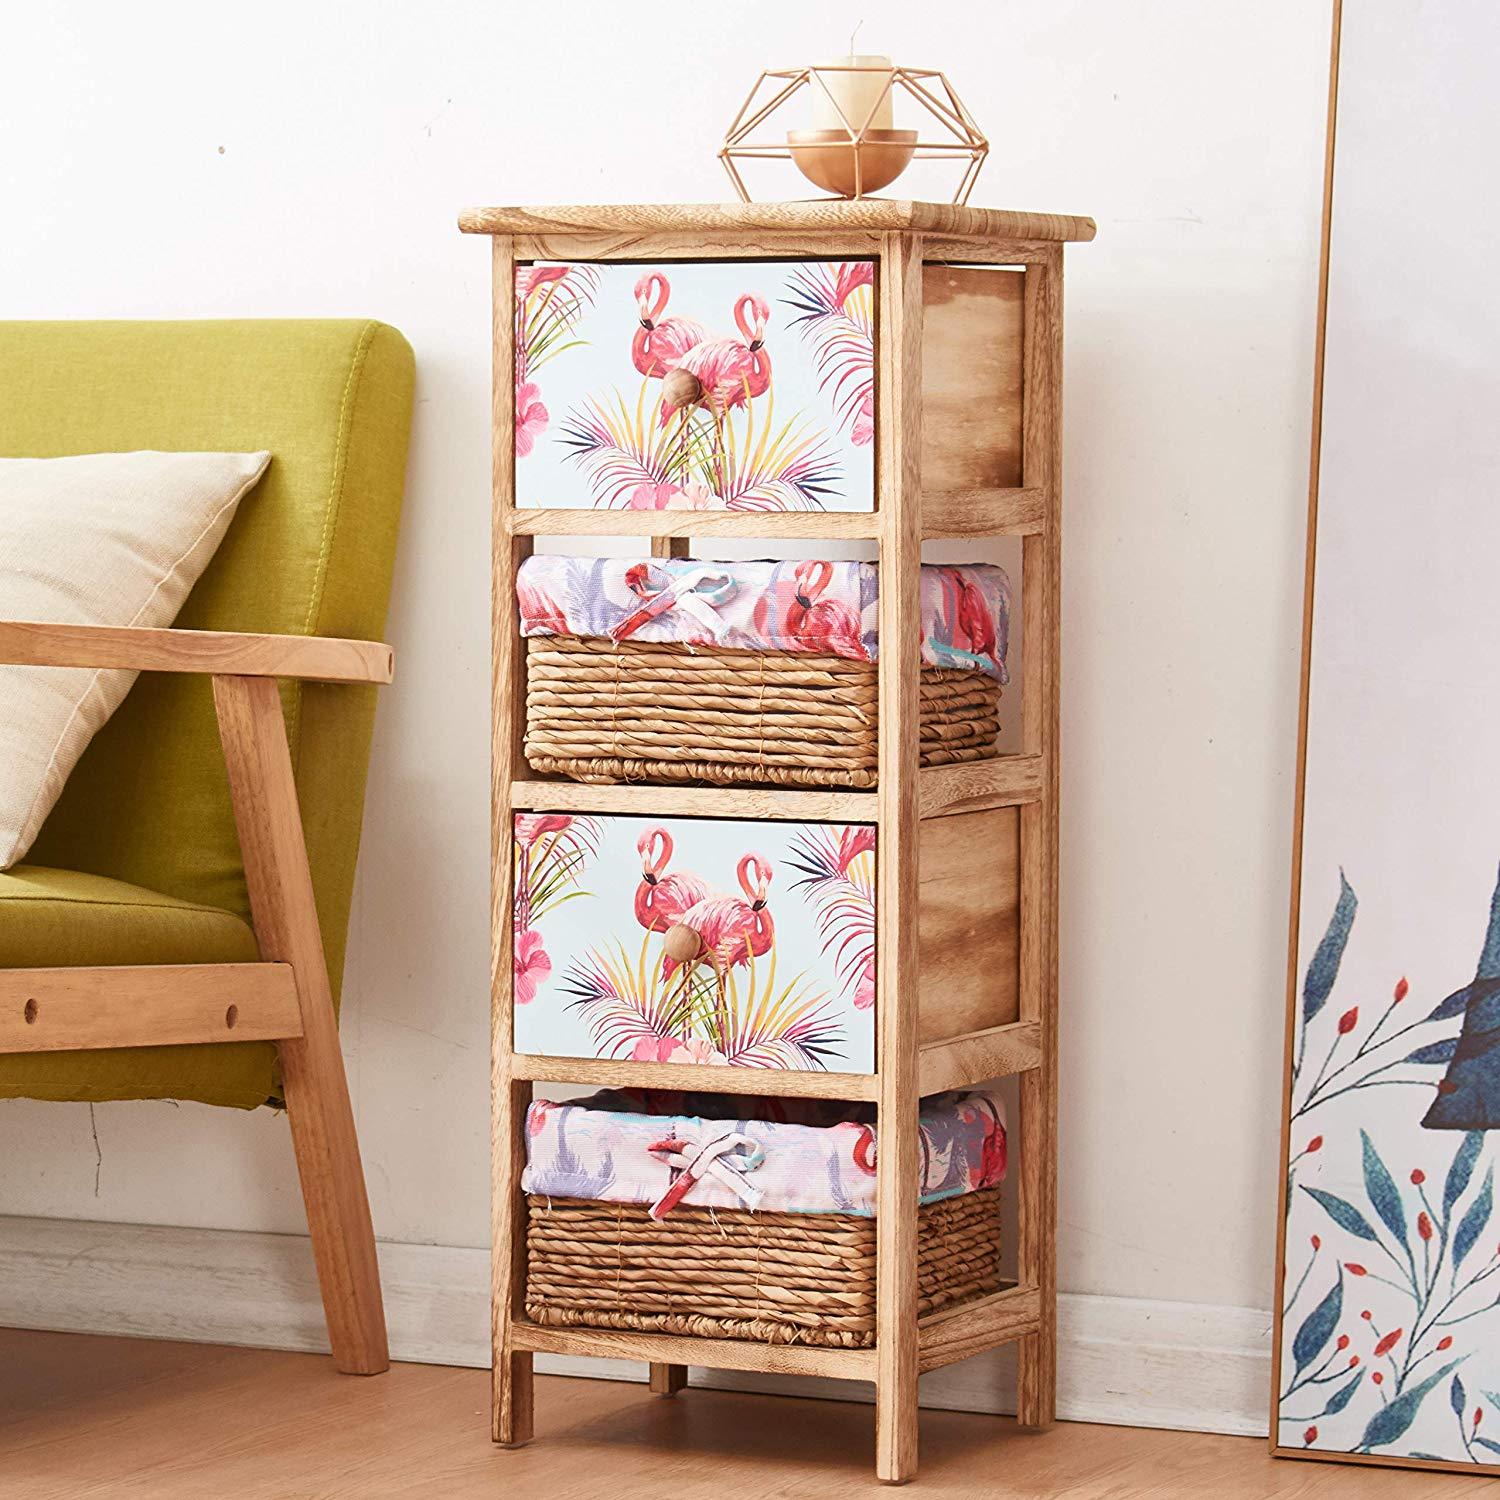 Cherry Tree Furniture Flamingo Pattern 2-Drawer & 2-Basket Wooden Cabinet Storage Unit with Woven Baskets